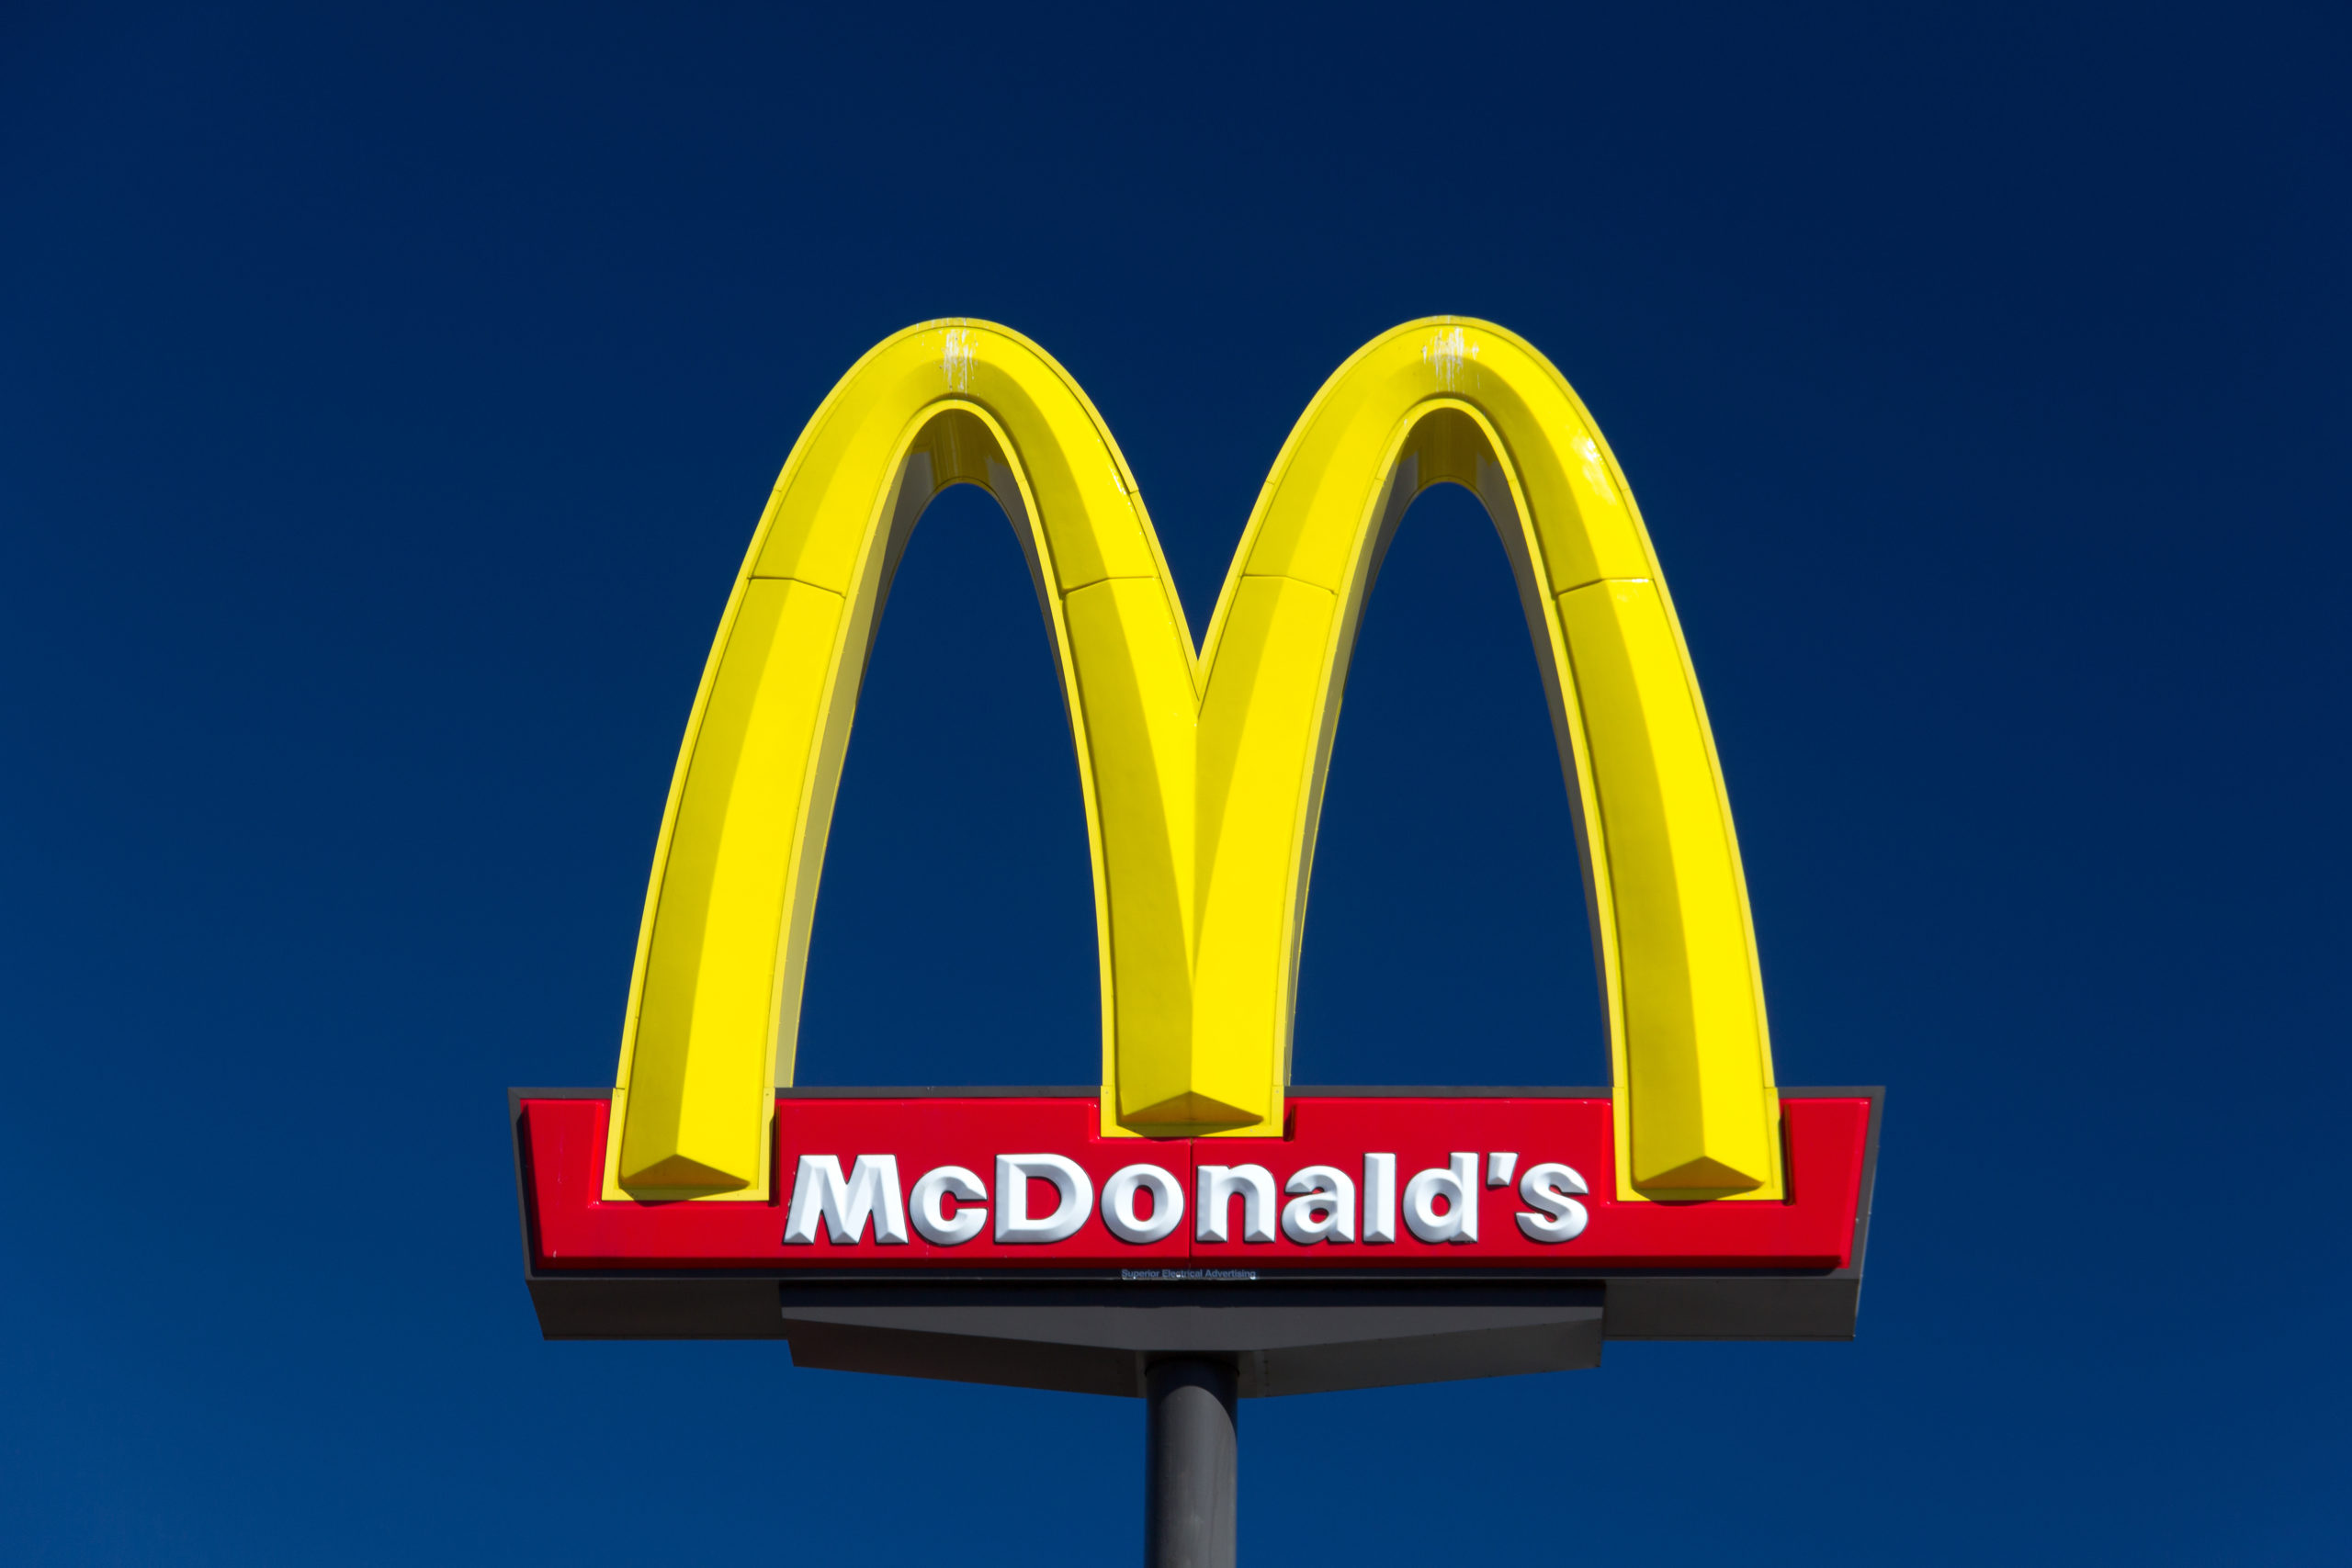 McDonald’s announces global ban of toxic chemicals in food packaging